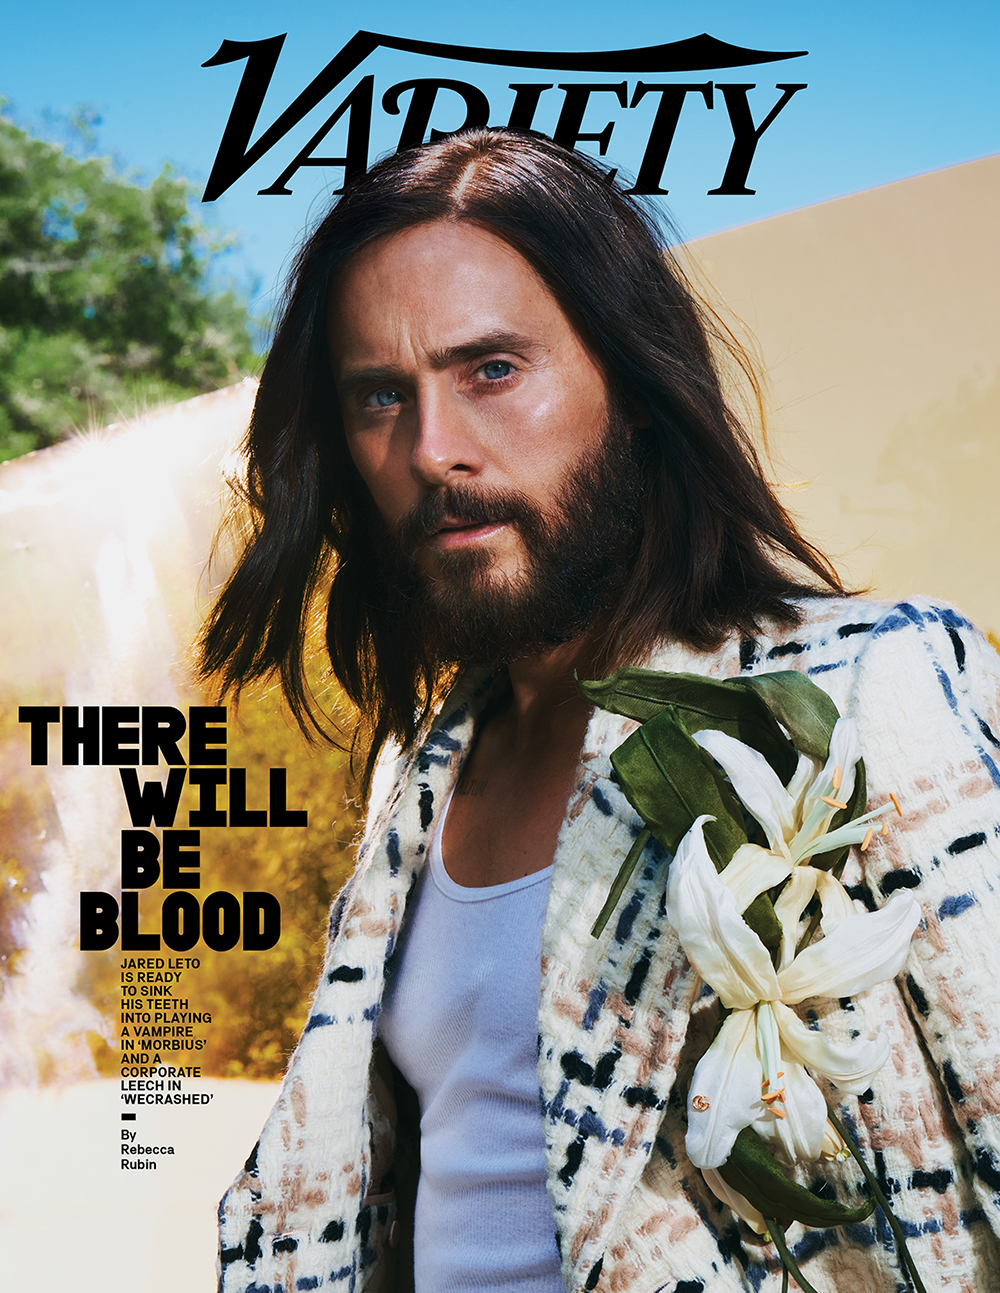 Jared Leto on Morbius, WeCrashed and New 30 Seconds to Mars Album